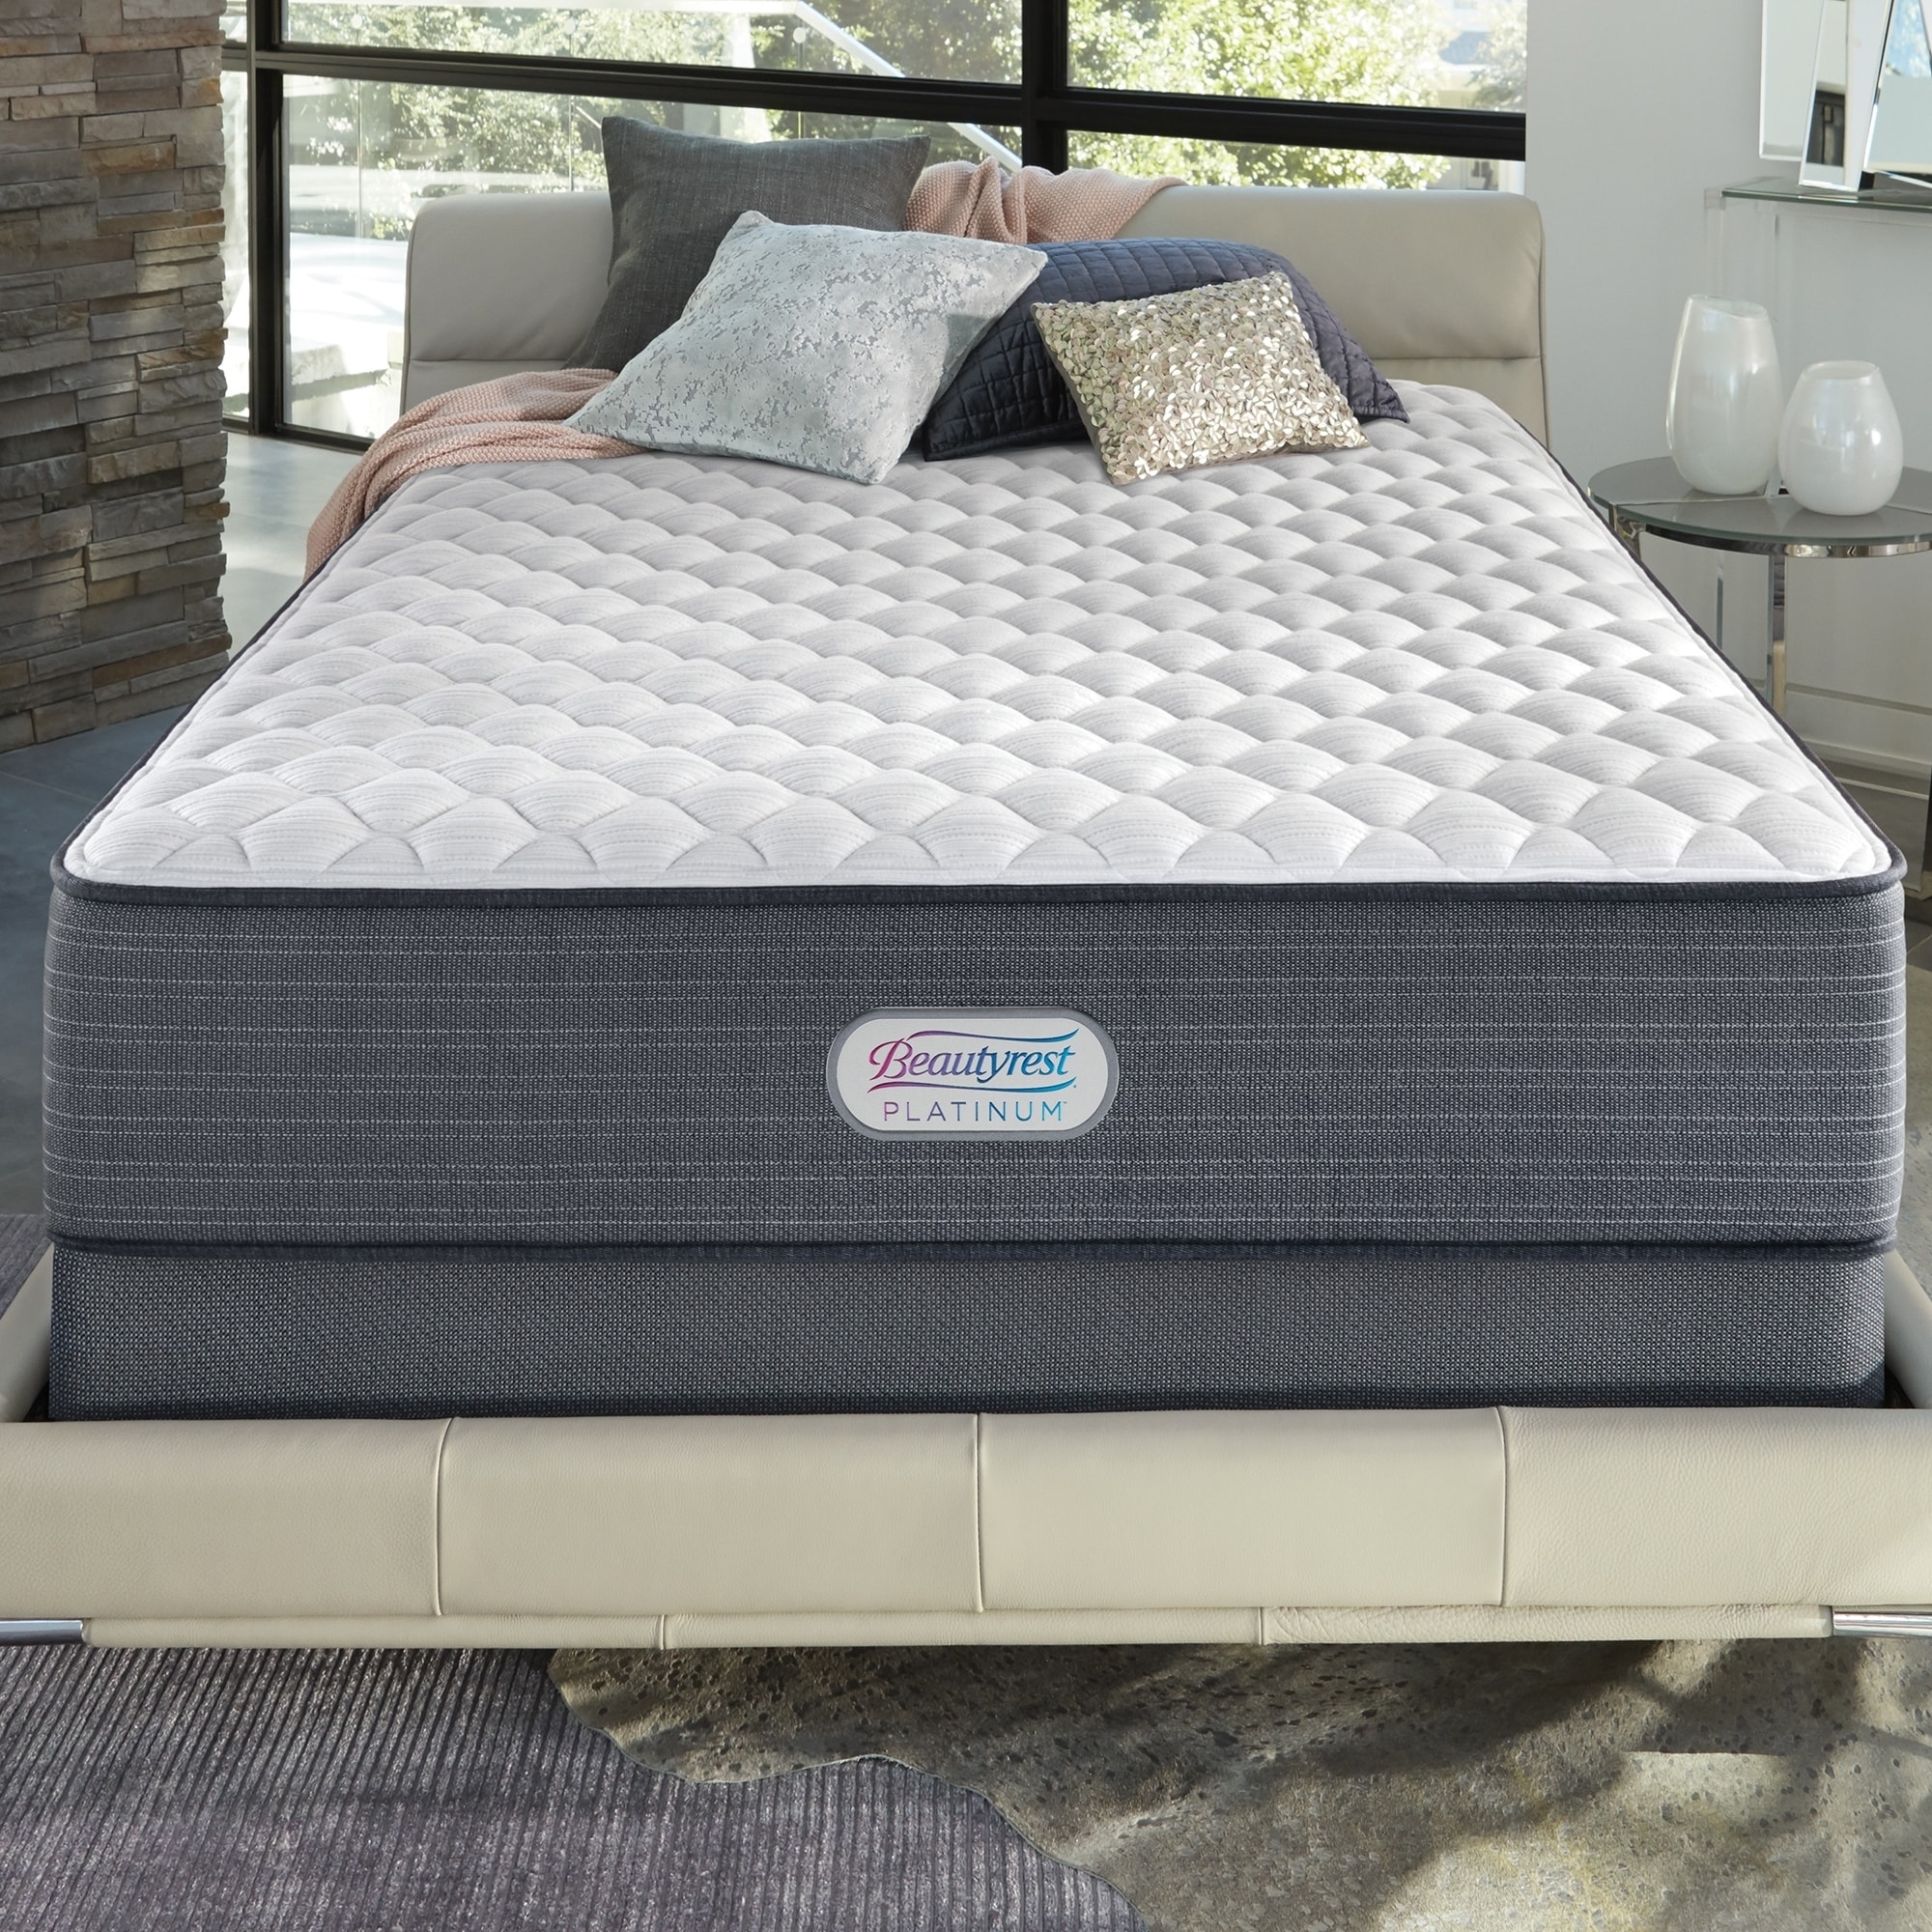 King Size Mattresses Shop Online At Overstock